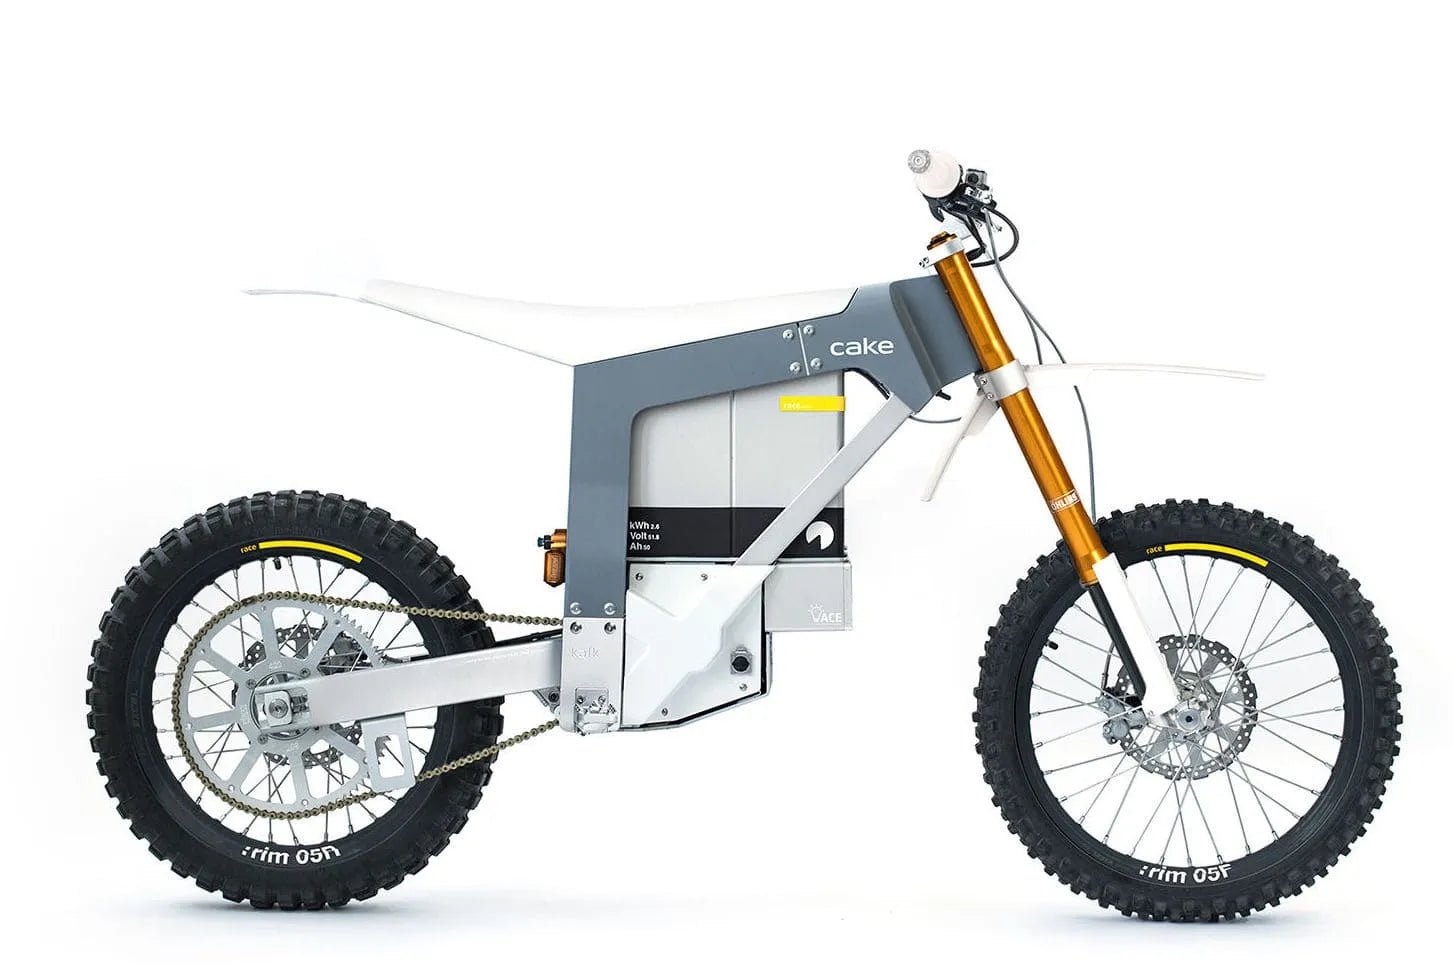 Hydro joins 'Cleanest Dirt Bike Ever' project, aiming for near-zero carbon  footprint